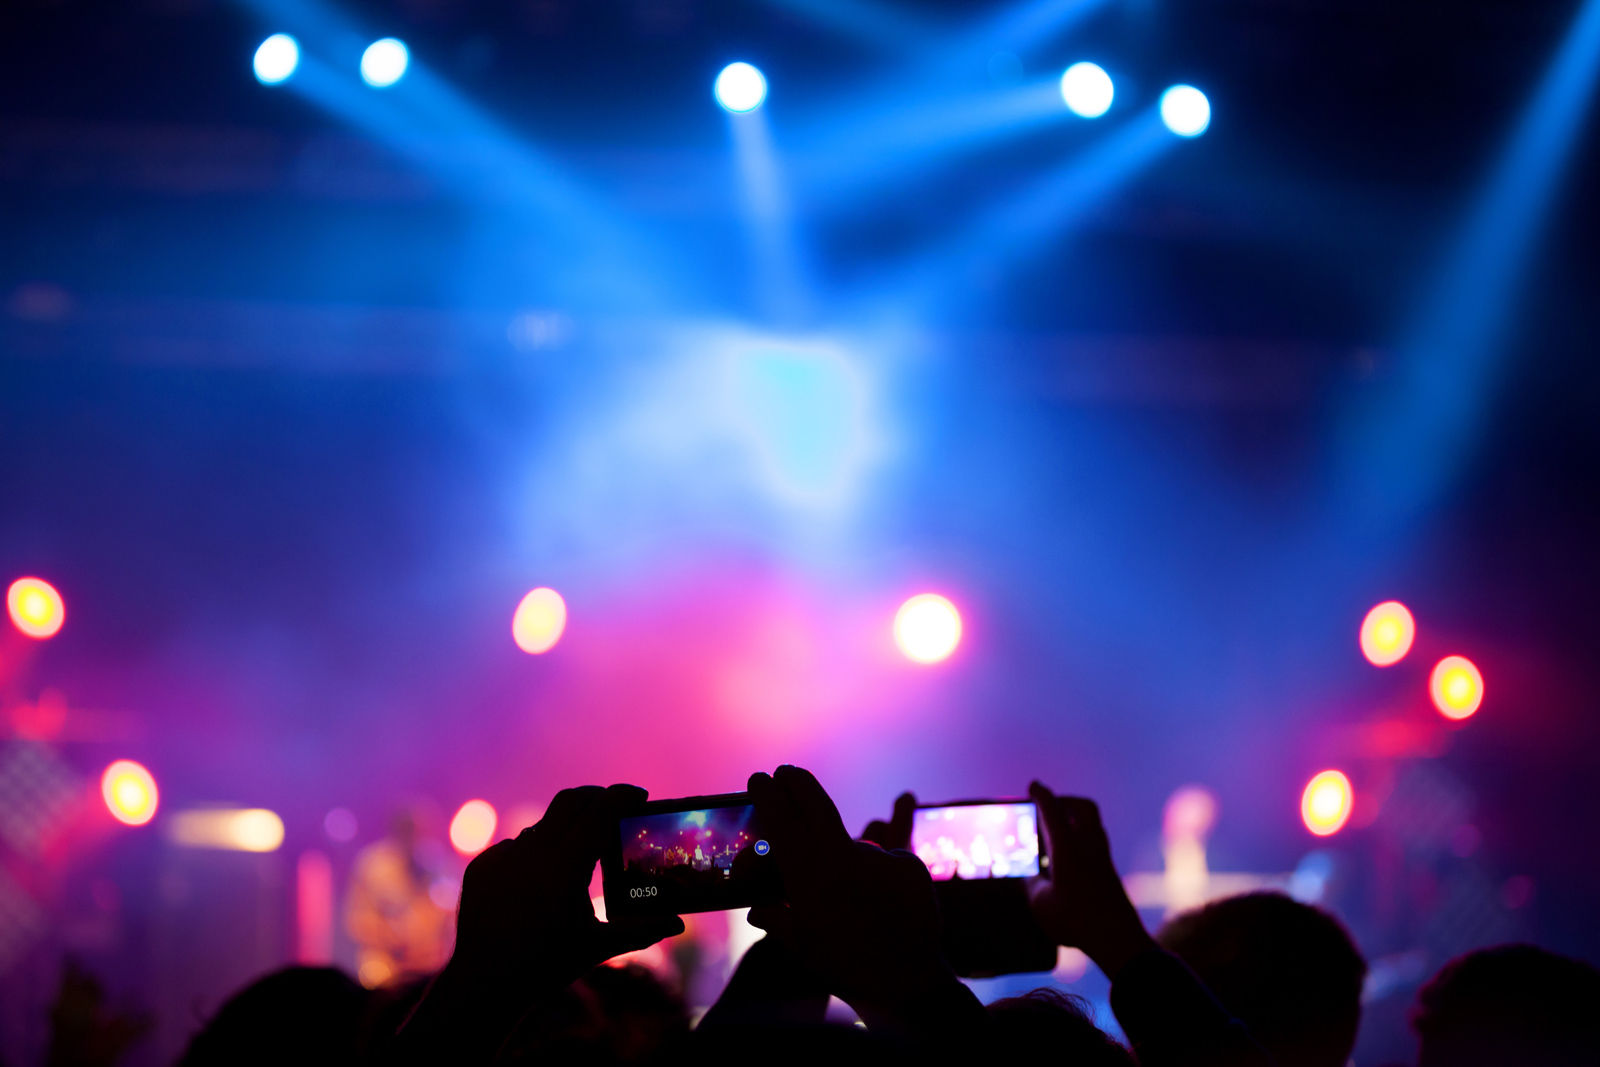 Rock and stay when you book our Saskatoon hotel to see one of the exciting concerts and events at the SaskTel Centre.